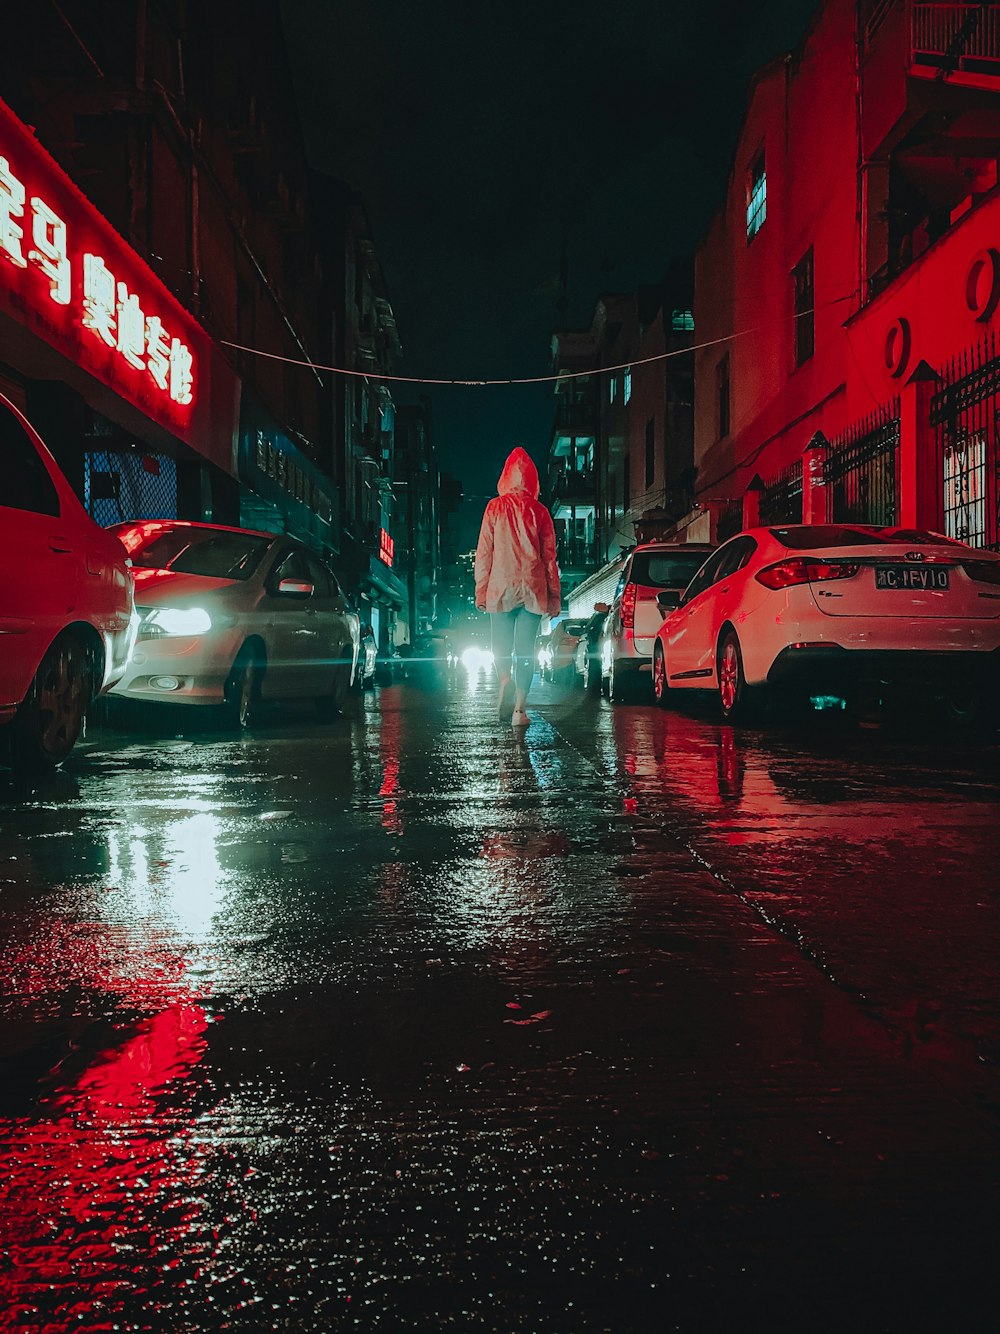 person in white robe walking on street during night time